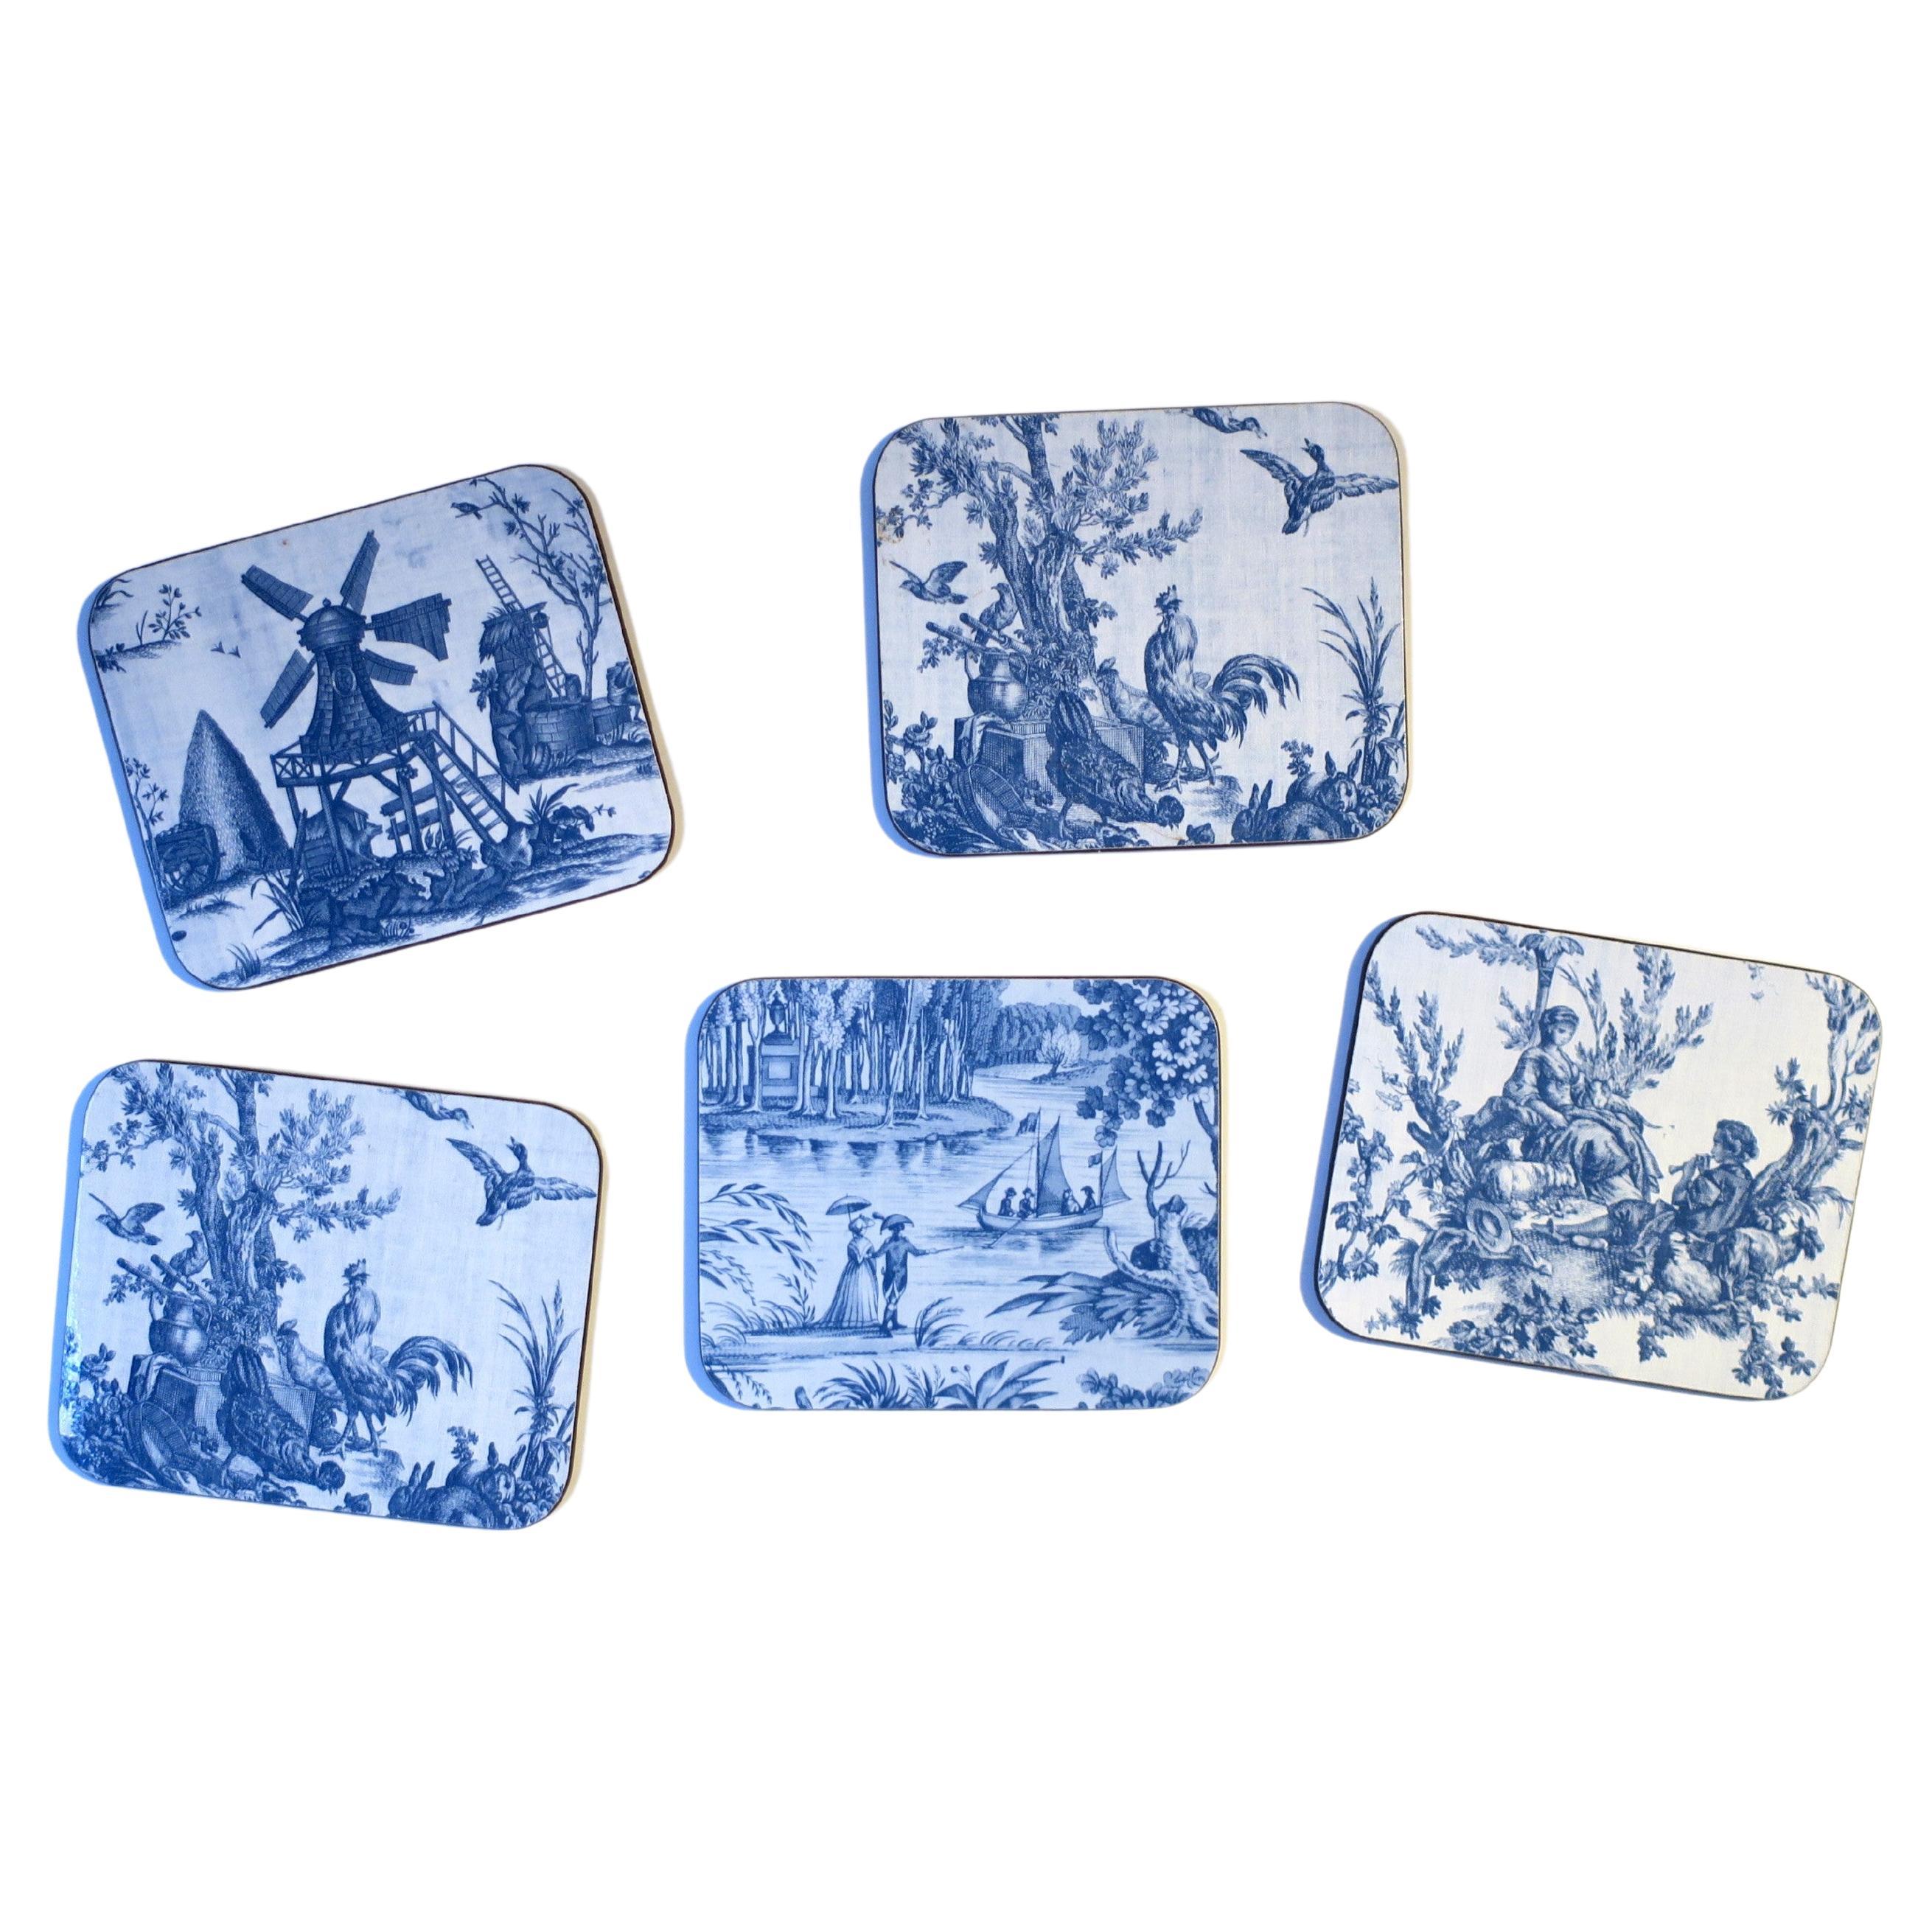 Blue and White French Toile Cocktail Drinks Coasters, Set of 5